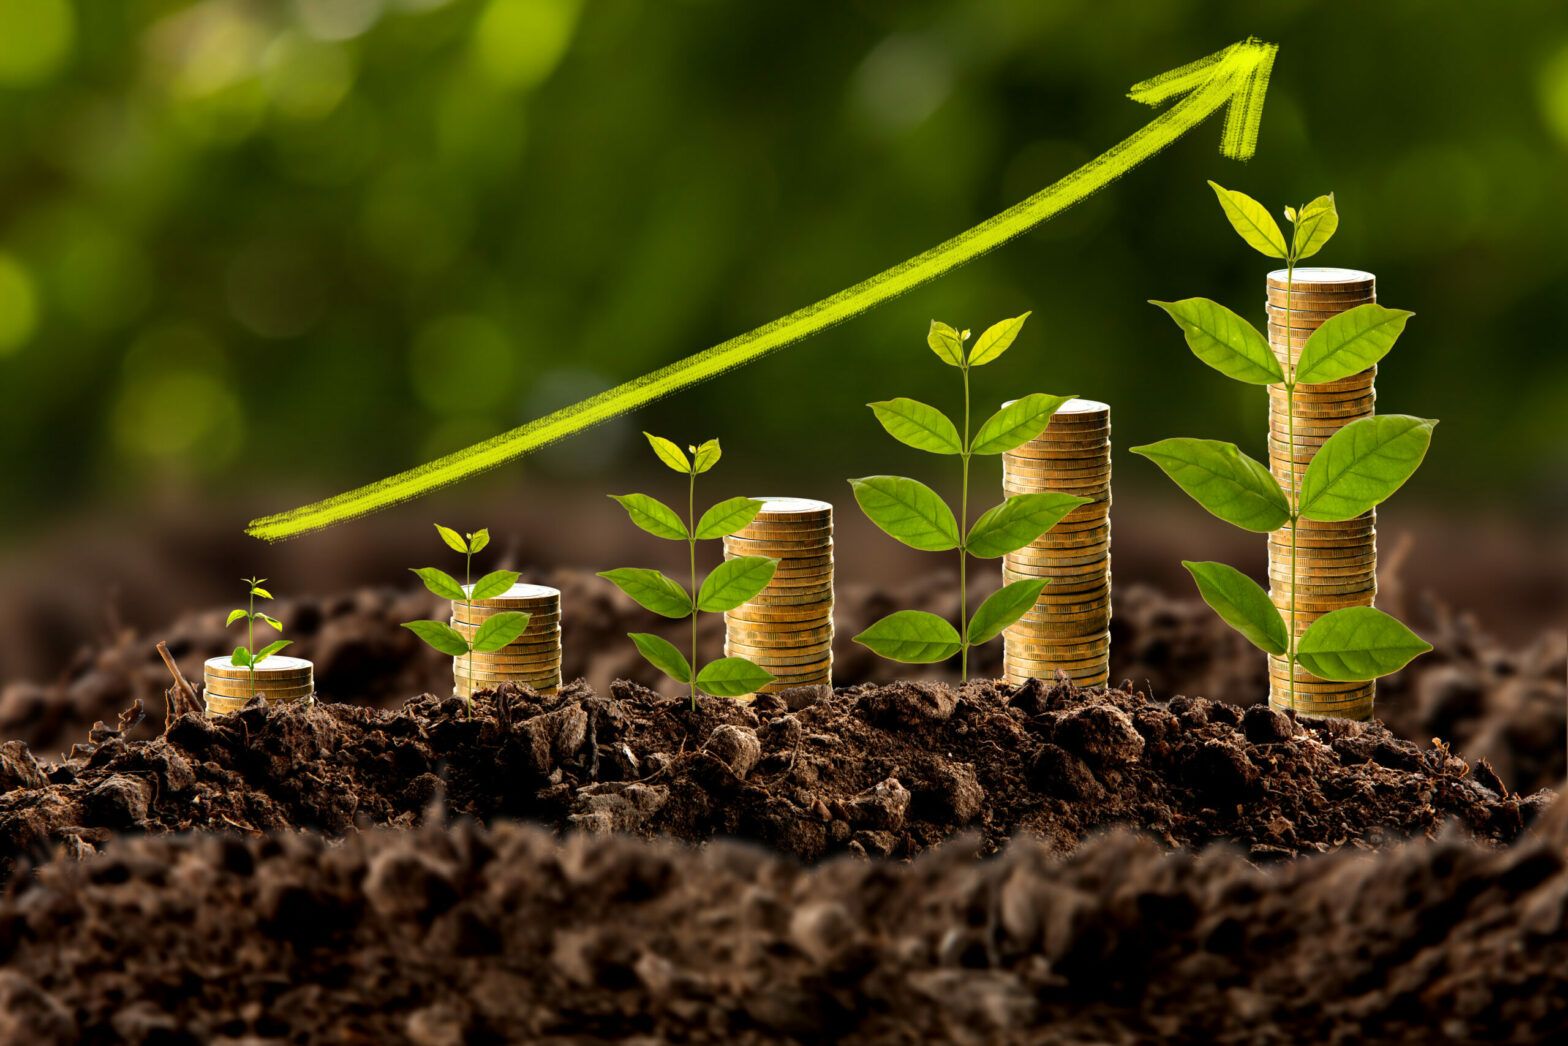 Can investing for income really be ESG-friendly?